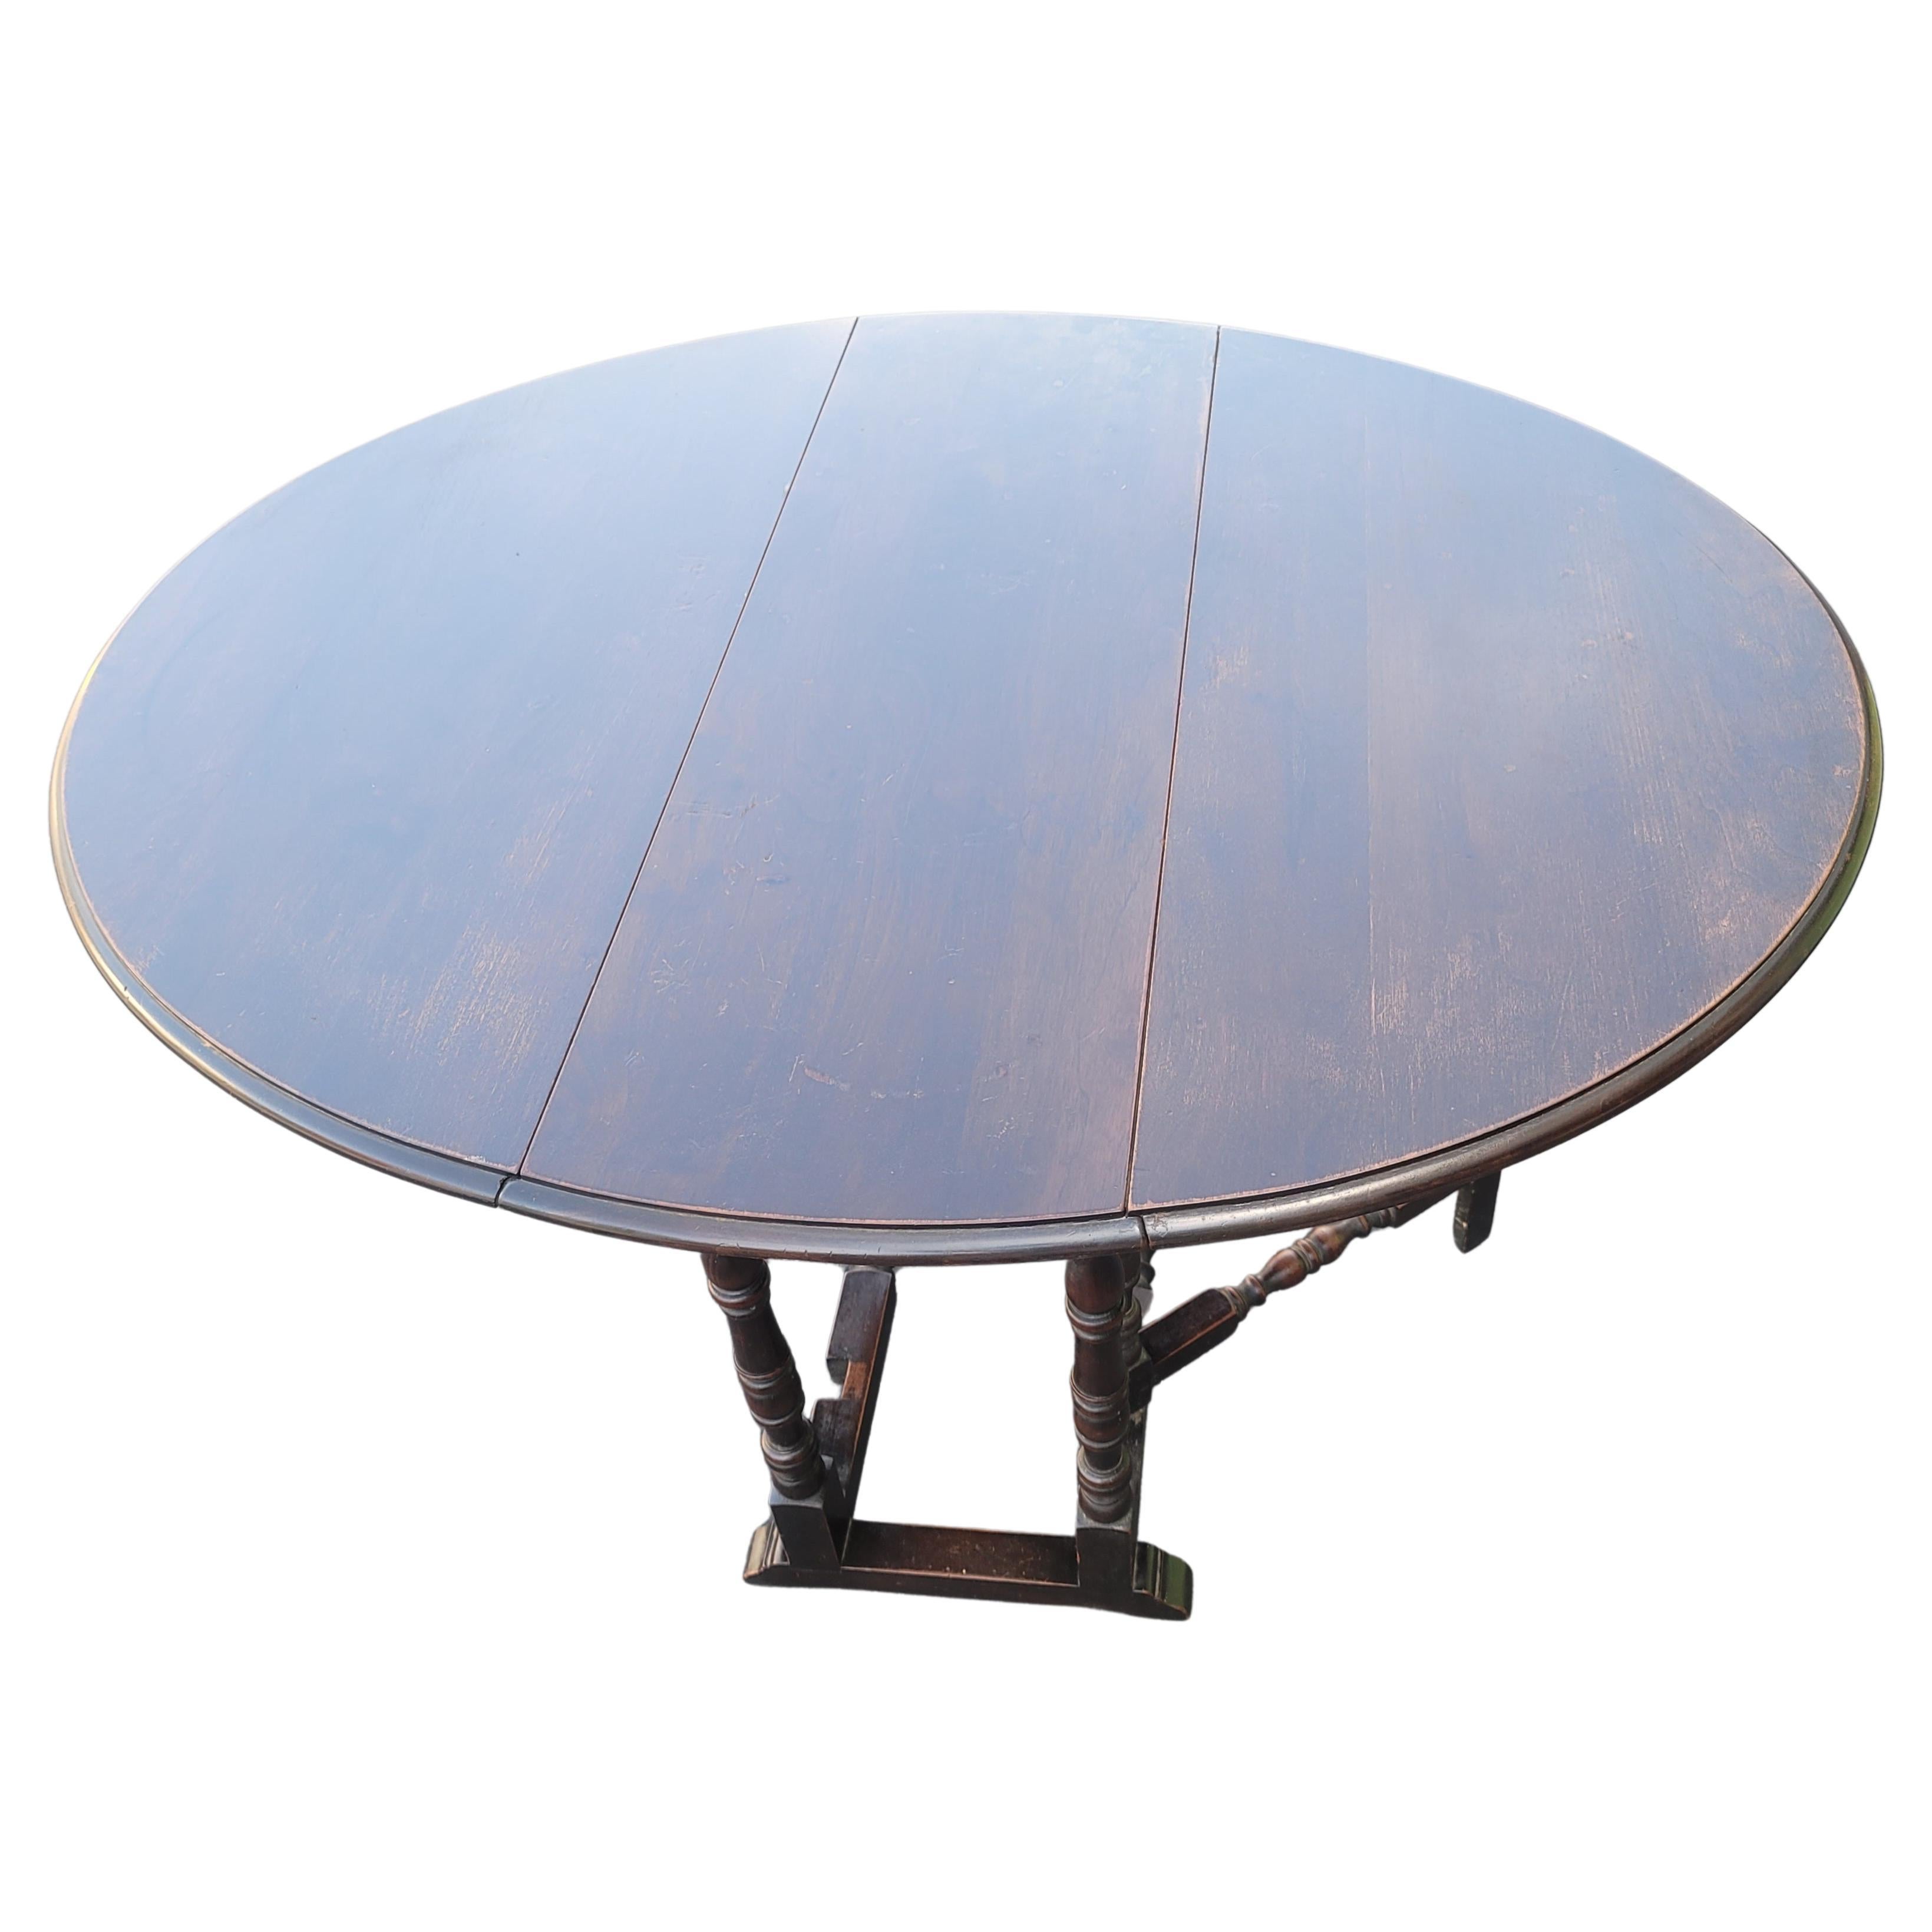 Antique walnut oval table. Functioning gatelegs. Great for small dining areas. Measures 48.5